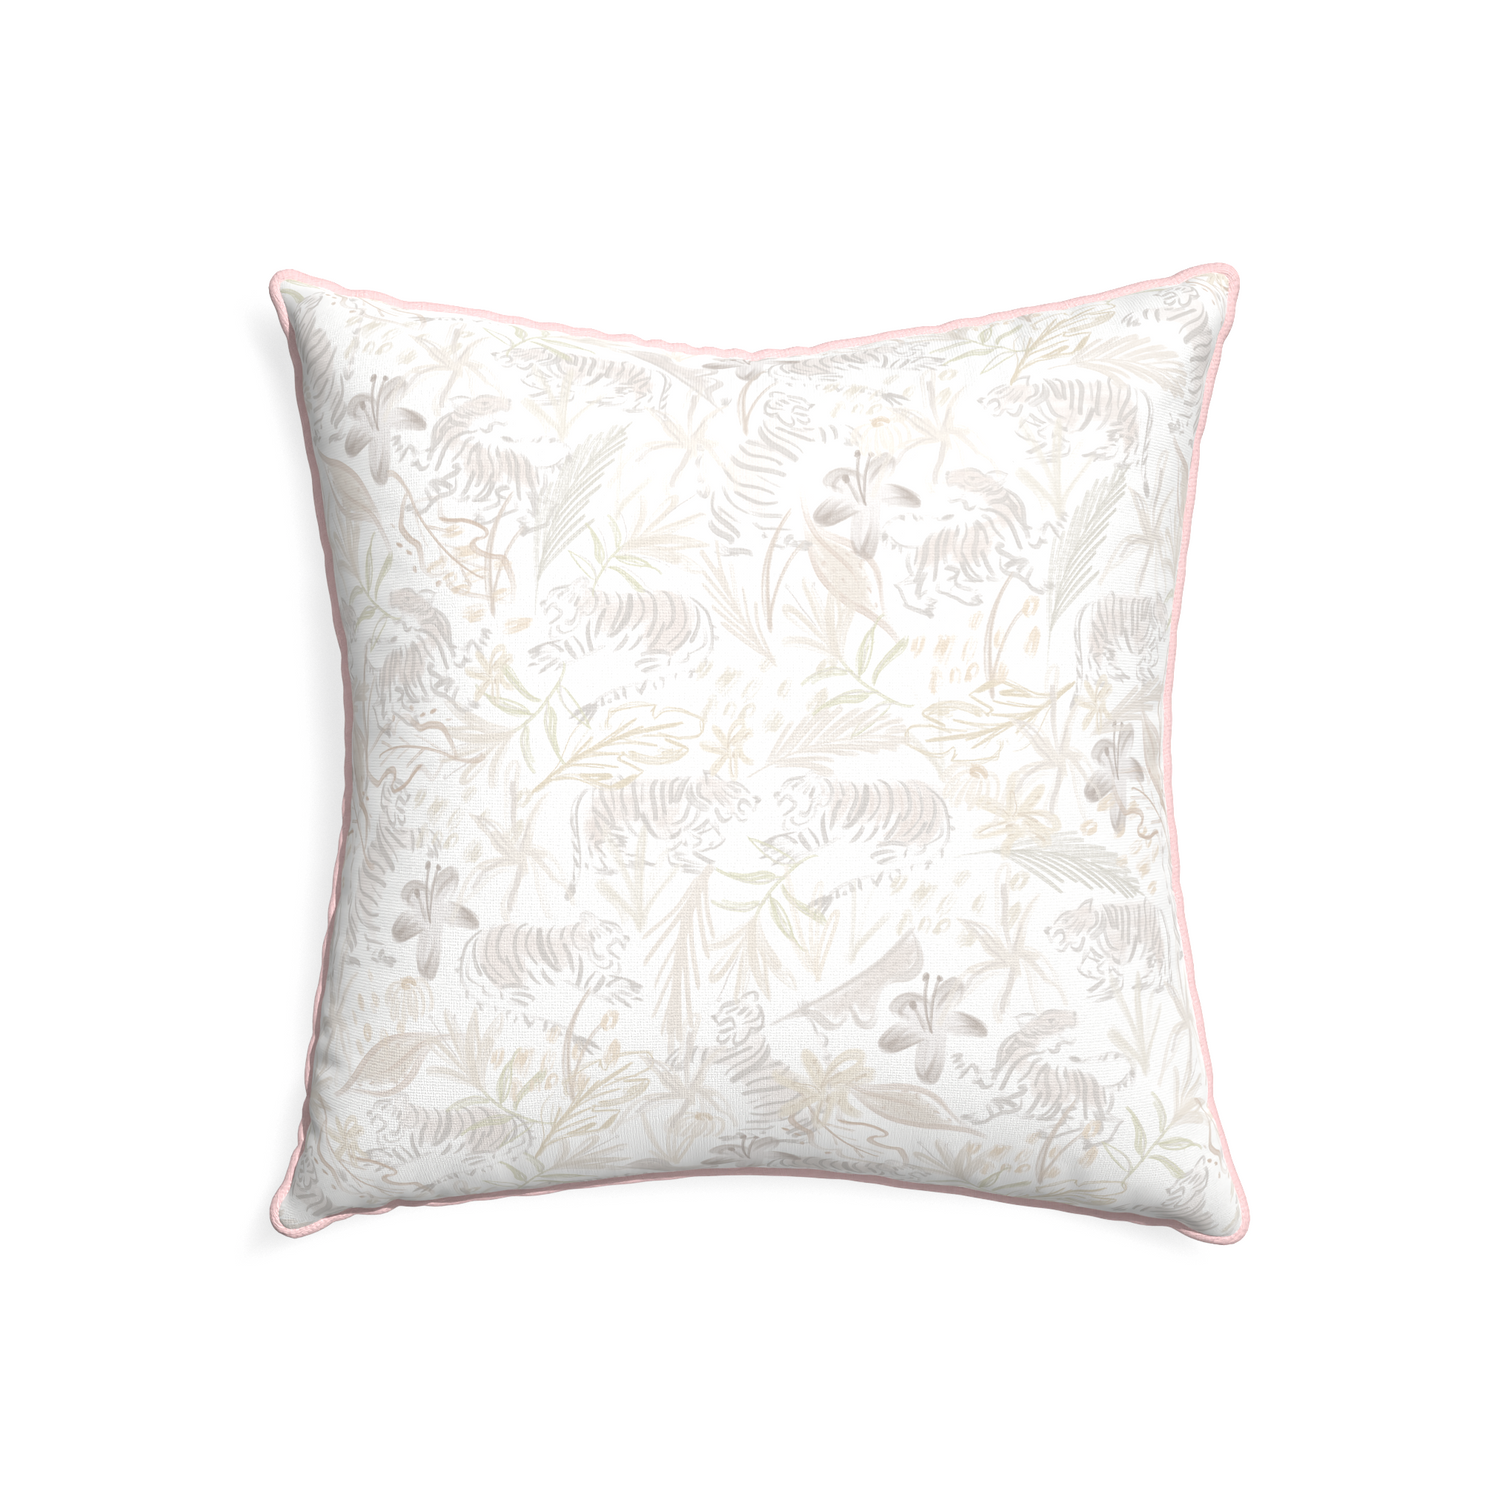 22-square frida sand custom pillow with petal piping on white background